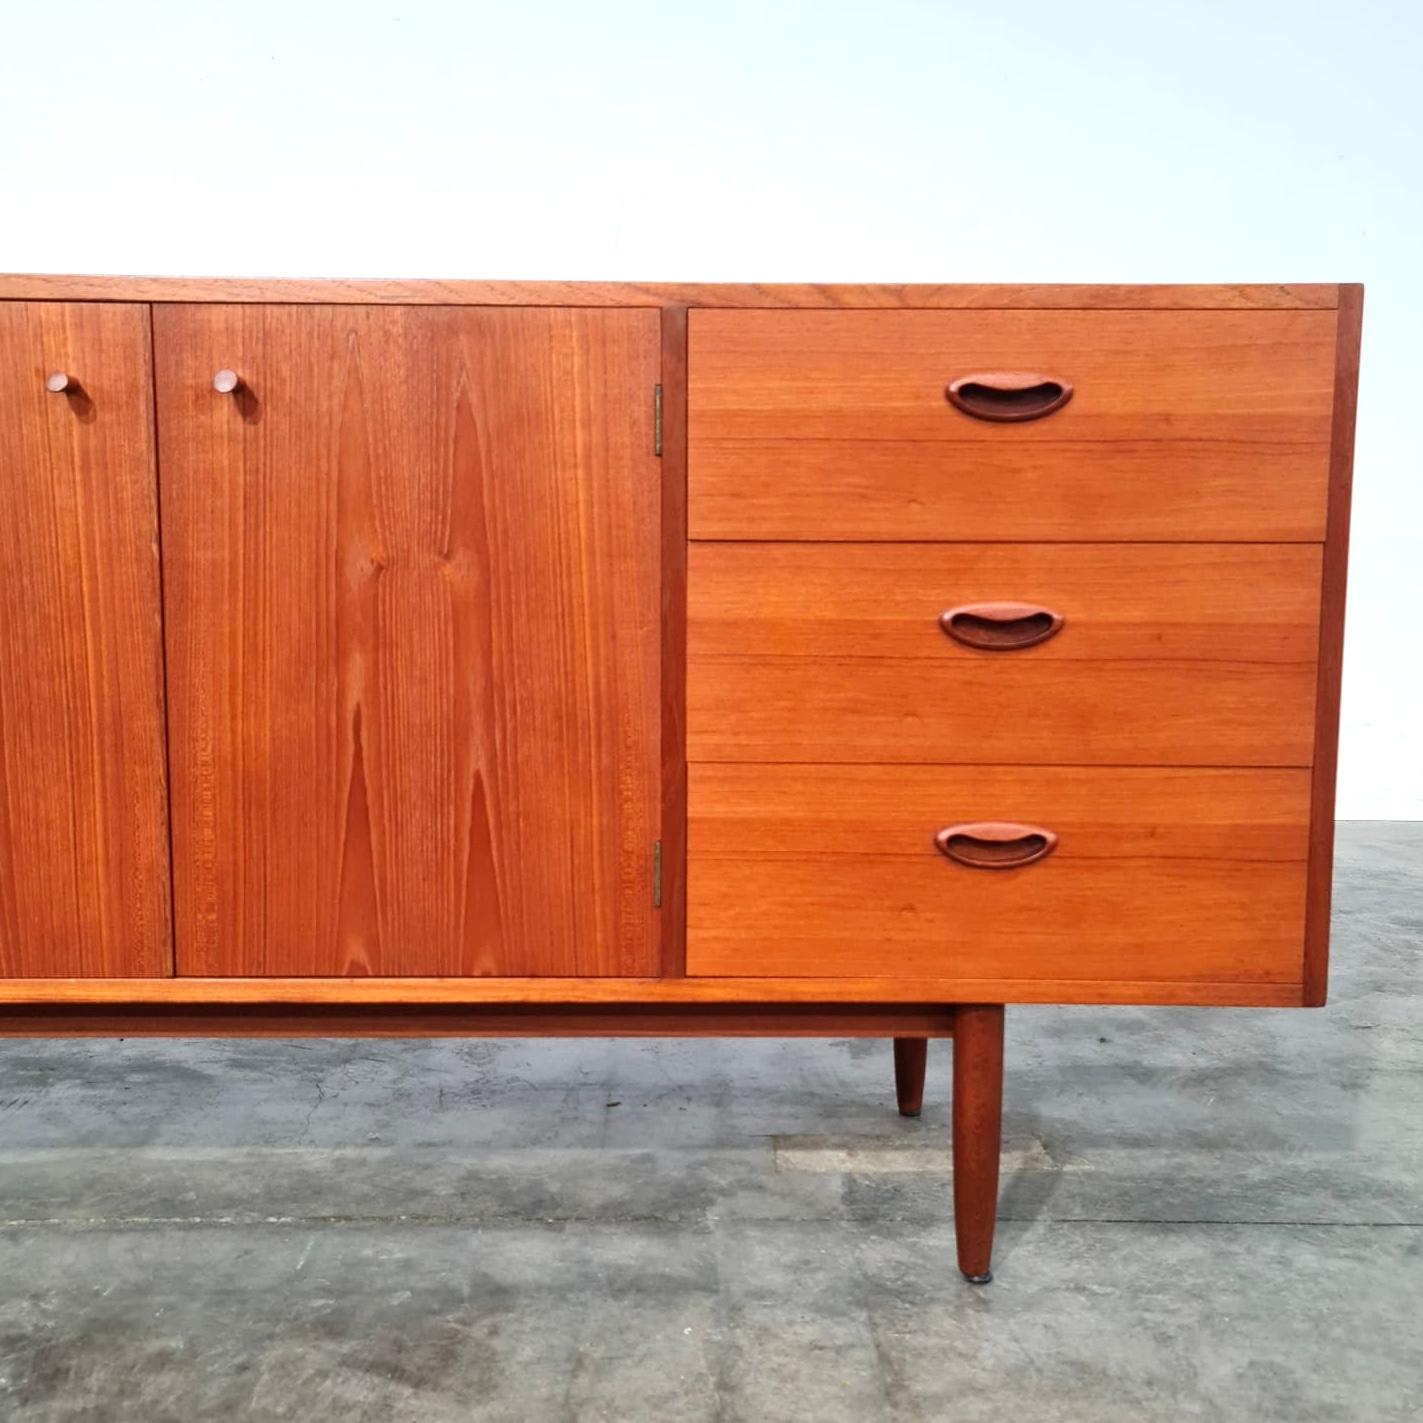 1965 Chiswell-Sideboard aus Teakholz  im Angebot 3